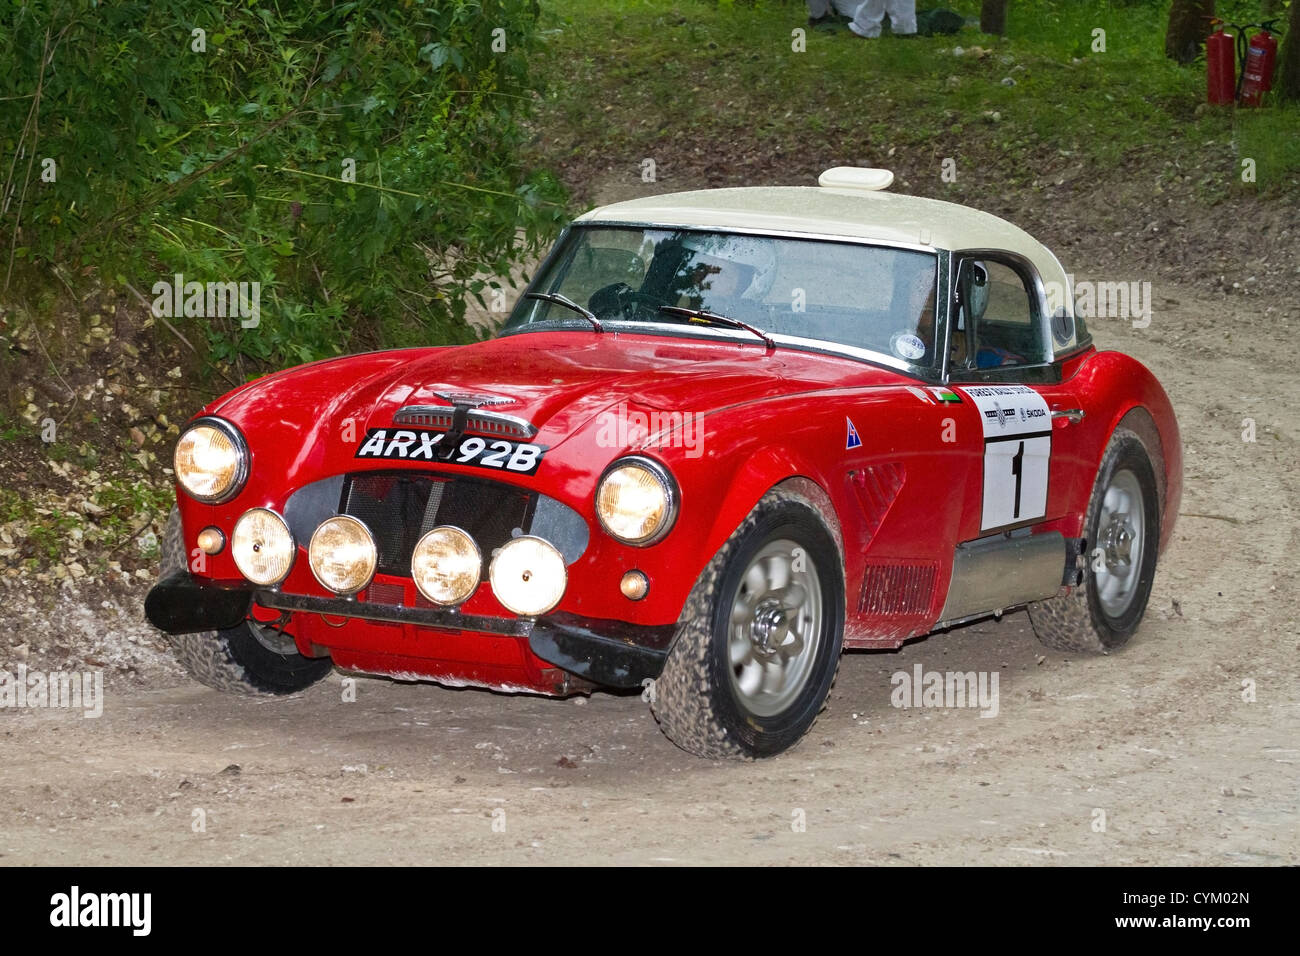 1964 Austin Healey 3000 Mk3 with driver Michael Darcey, rally stage at the 2012 Goodwood Festival of Speed, Sussex, England, UK. Stock Photo